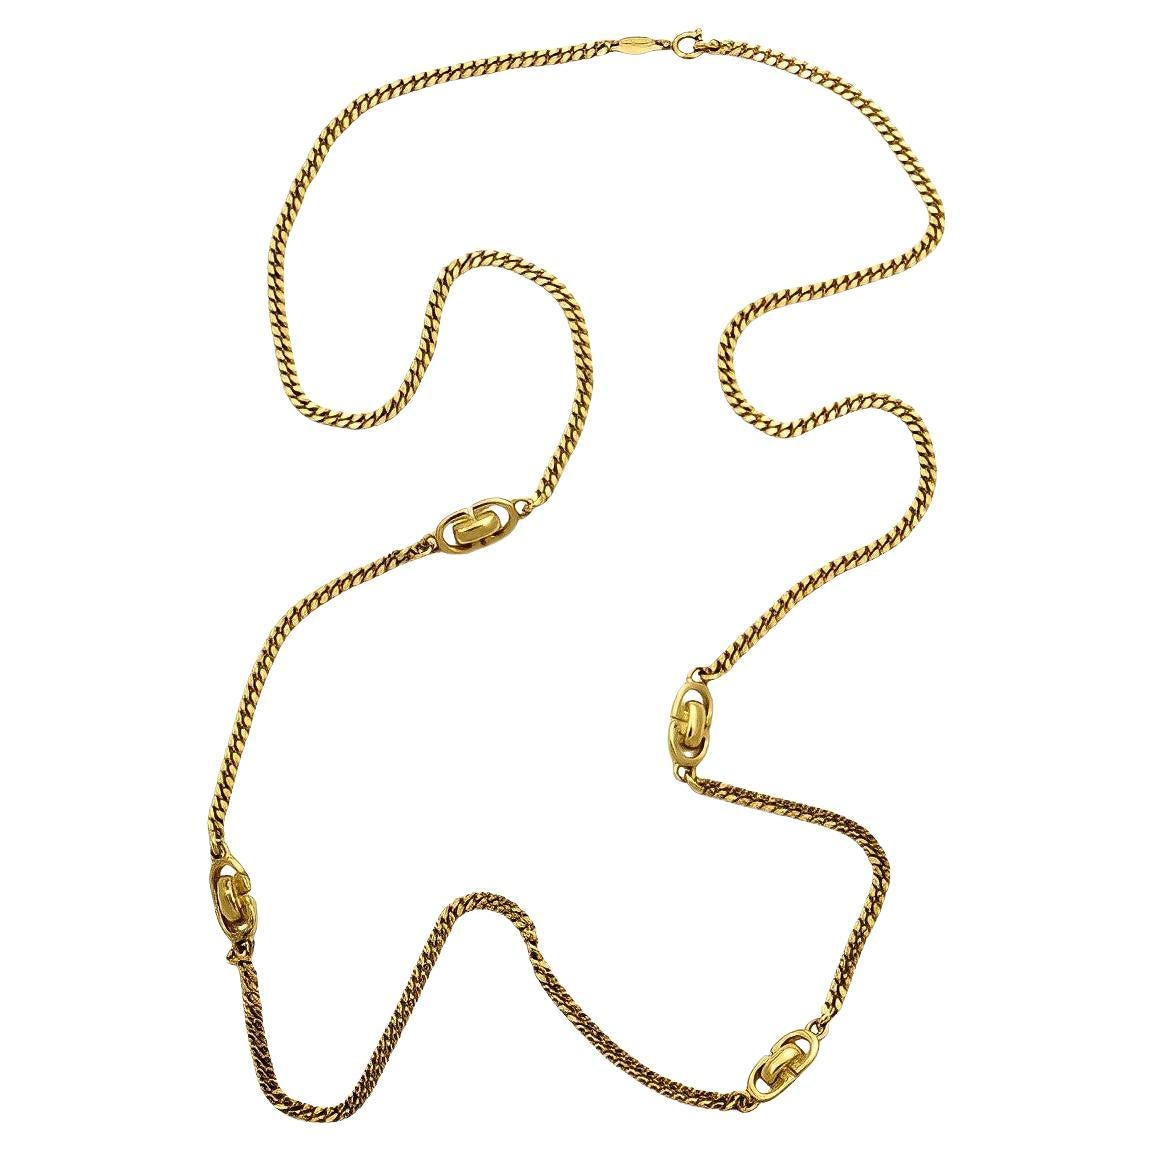 Christian Dior Long Gold Plated Curb Link Chain Necklace circa 1980s For Sale